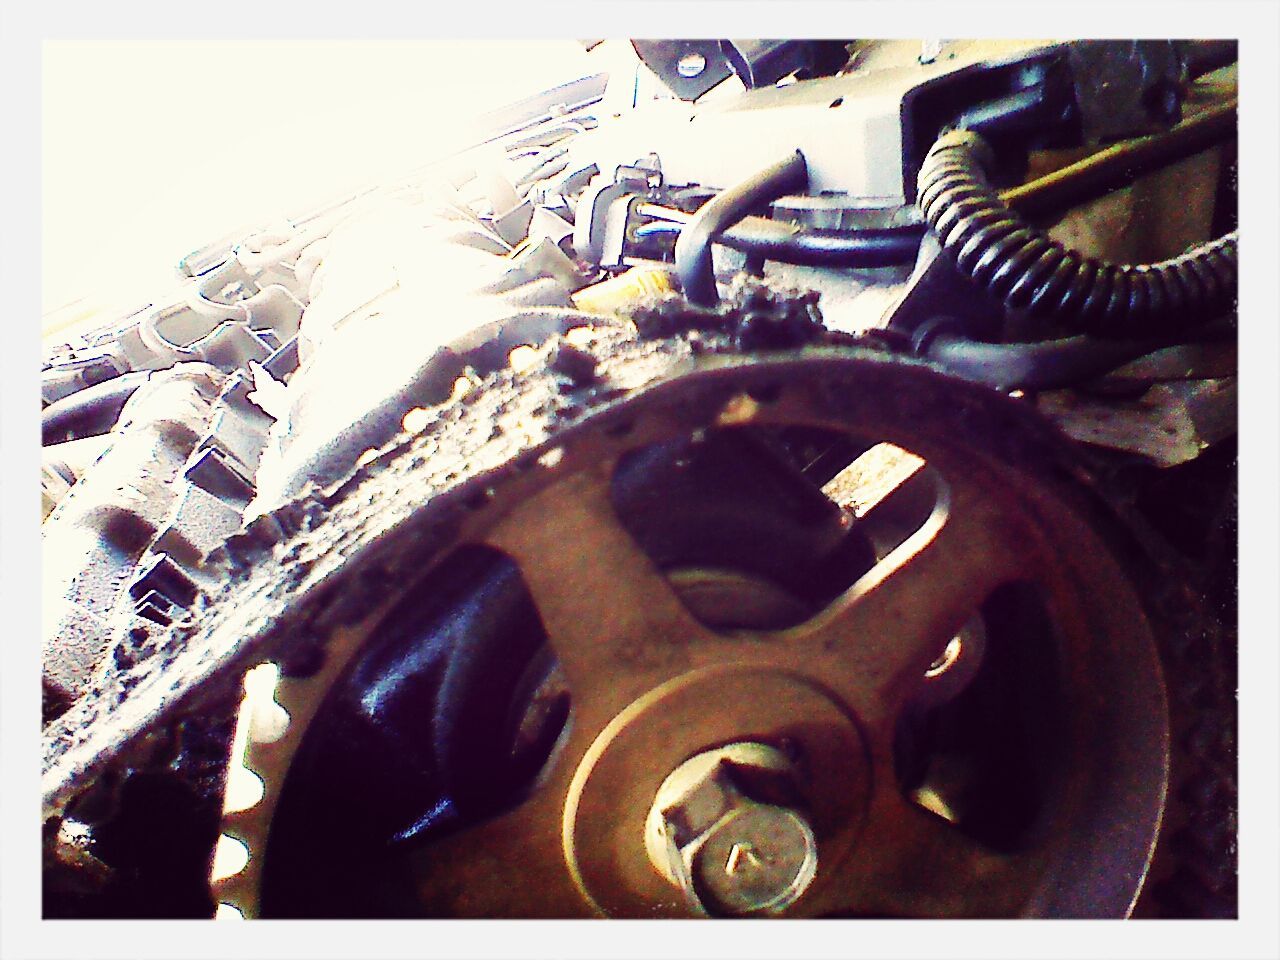 metal, metallic, transfer print, close-up, machine part, auto post production filter, old, machinery, rusty, indoors, old-fashioned, wheel, part of, no people, transportation, connection, vehicle part, high angle view, retro styled, obsolete